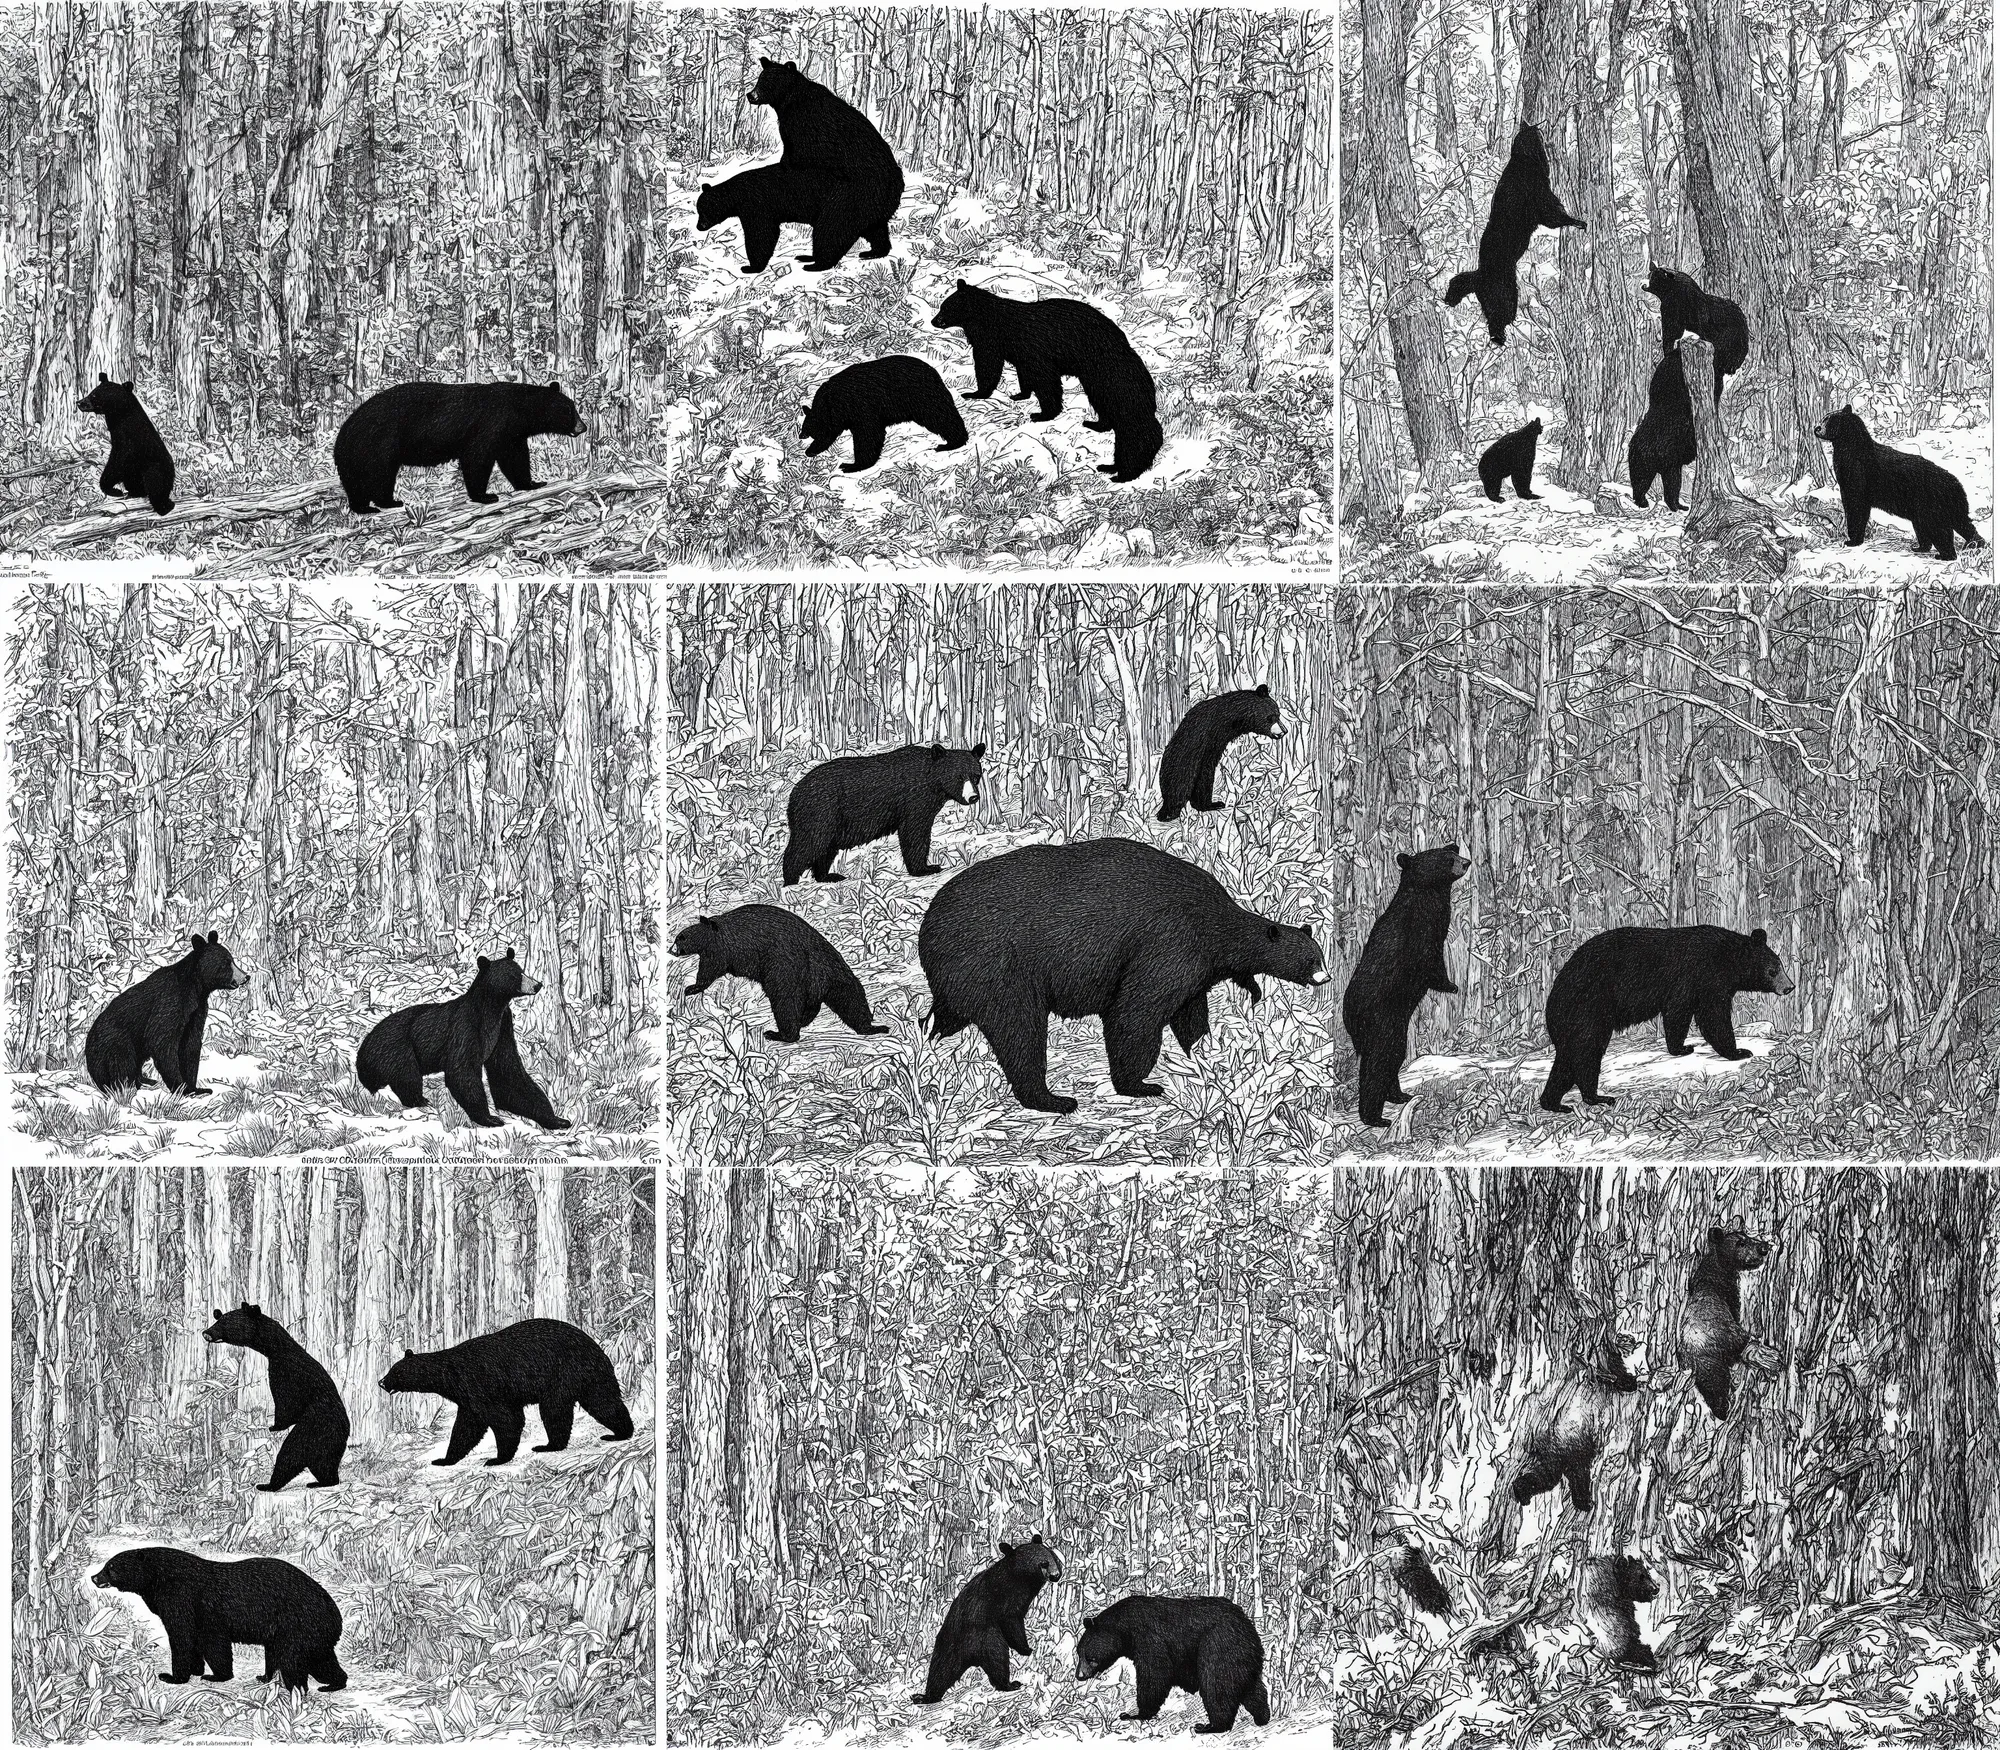 Prompt: one individual black bear in the forest, by Currier and Ives, coloring book page, black and white, pen & ink drawing